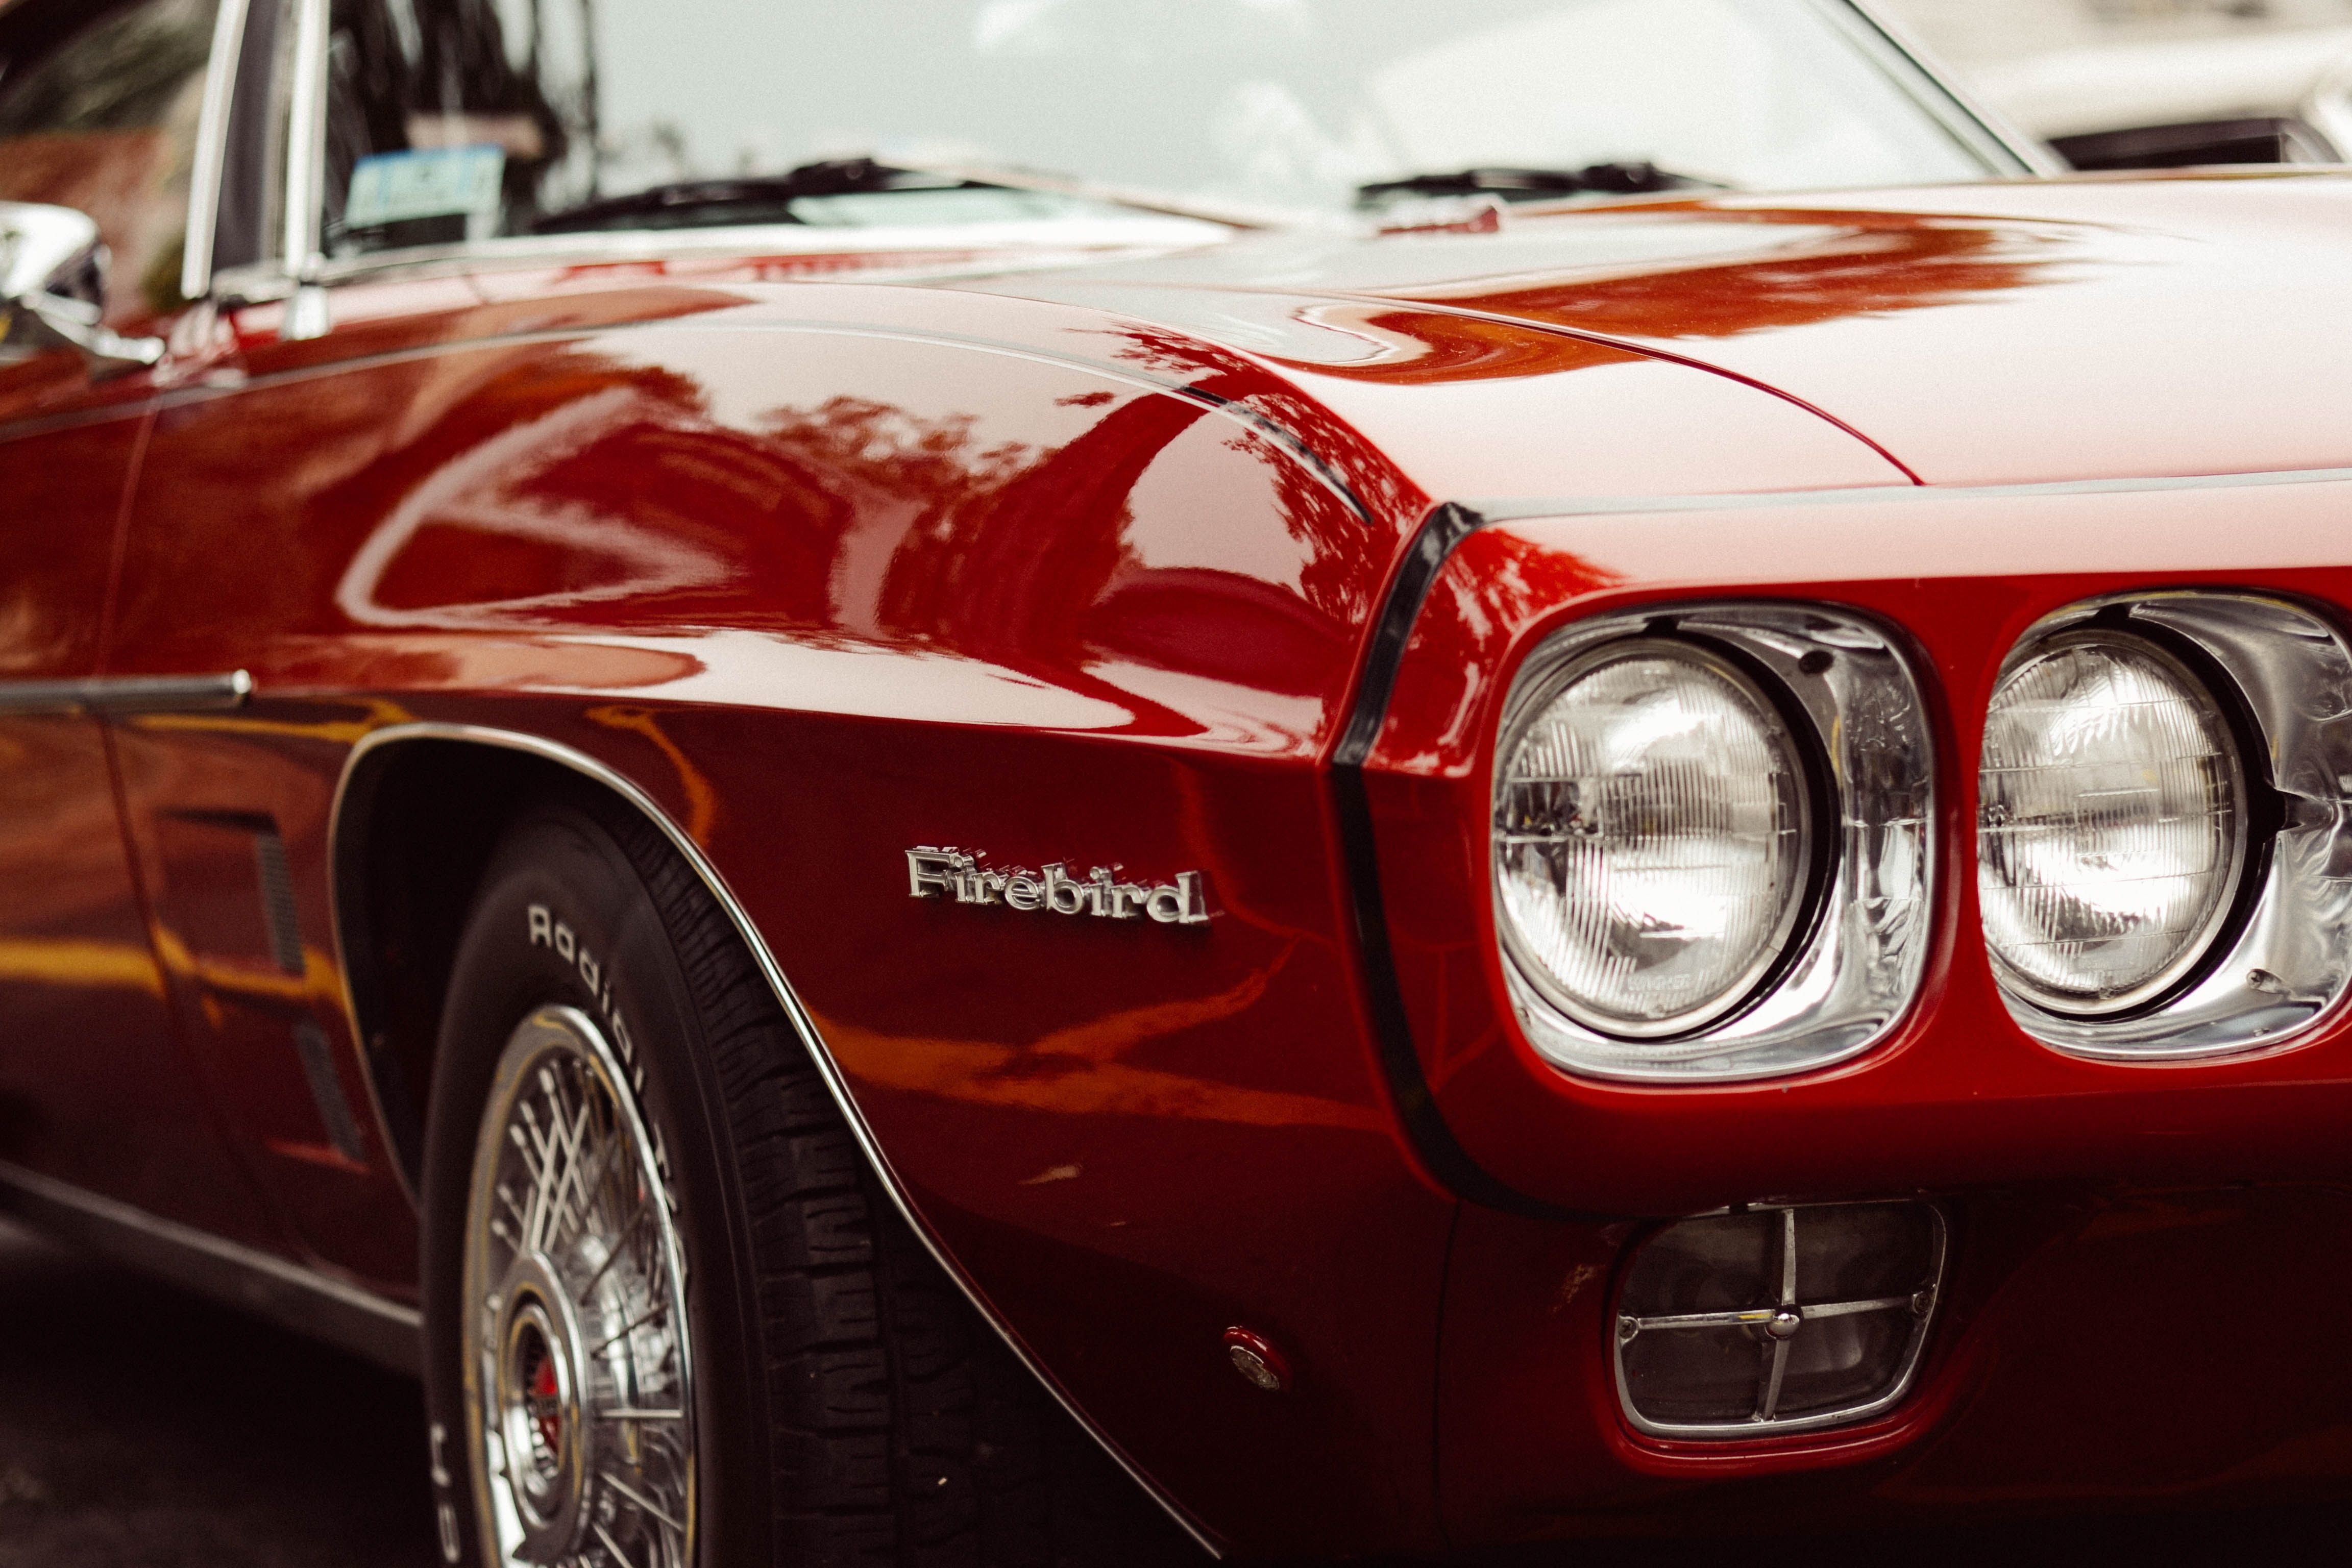 Muscle Car Picture. Download Free Image